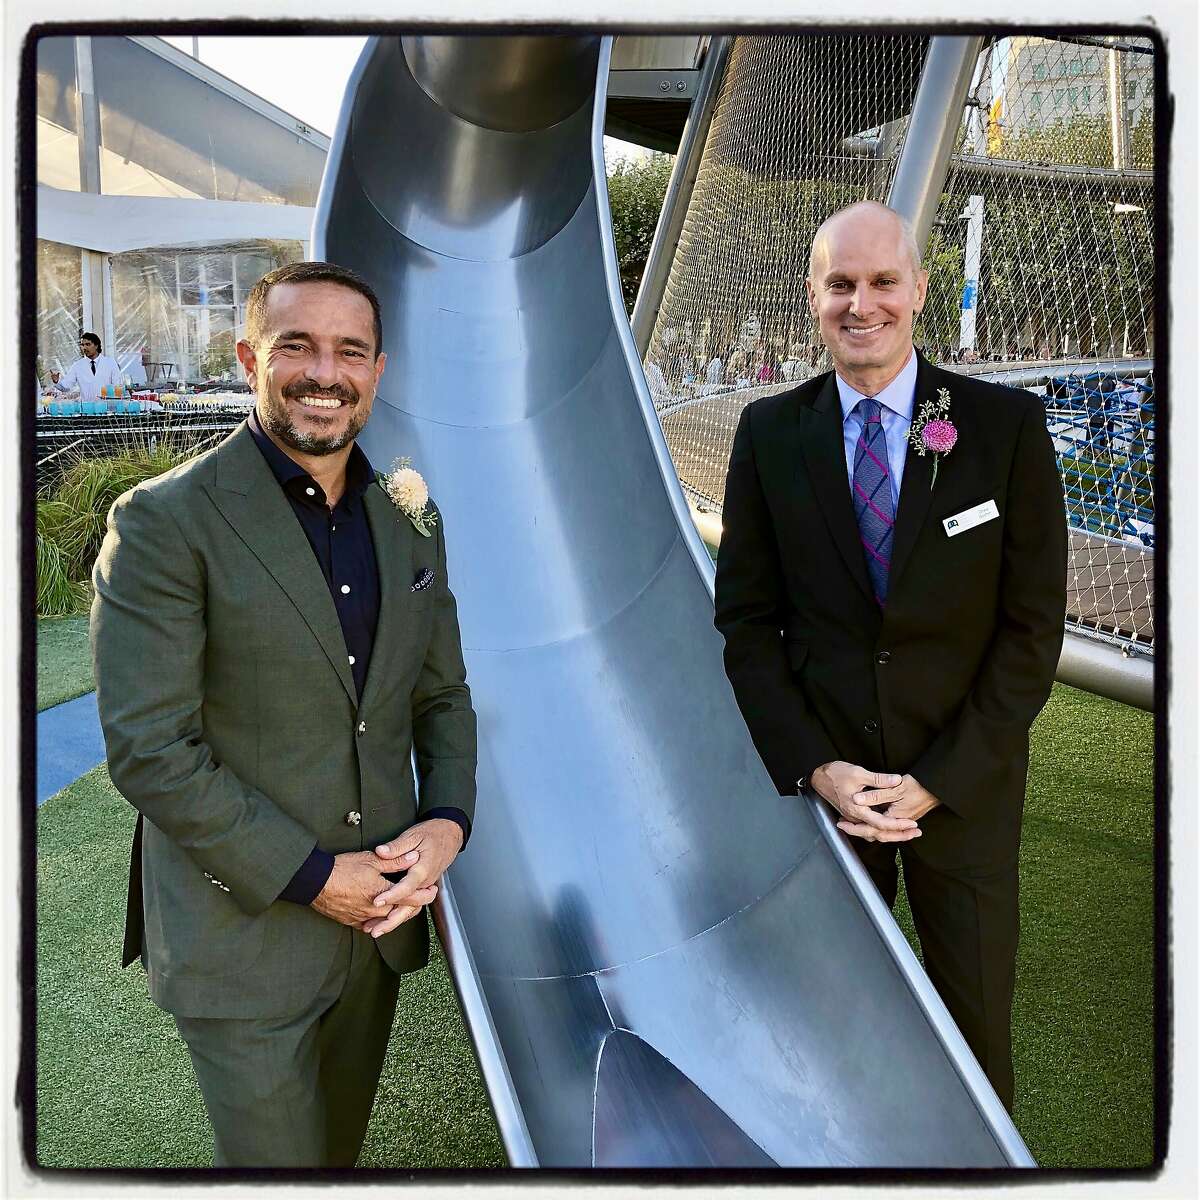 SF Rec & Parks GM Phil Ginsburg (left) with SF Parks Alliance CEO Drew Becher at the Helen Diller Playground Sept. 14, 2019.